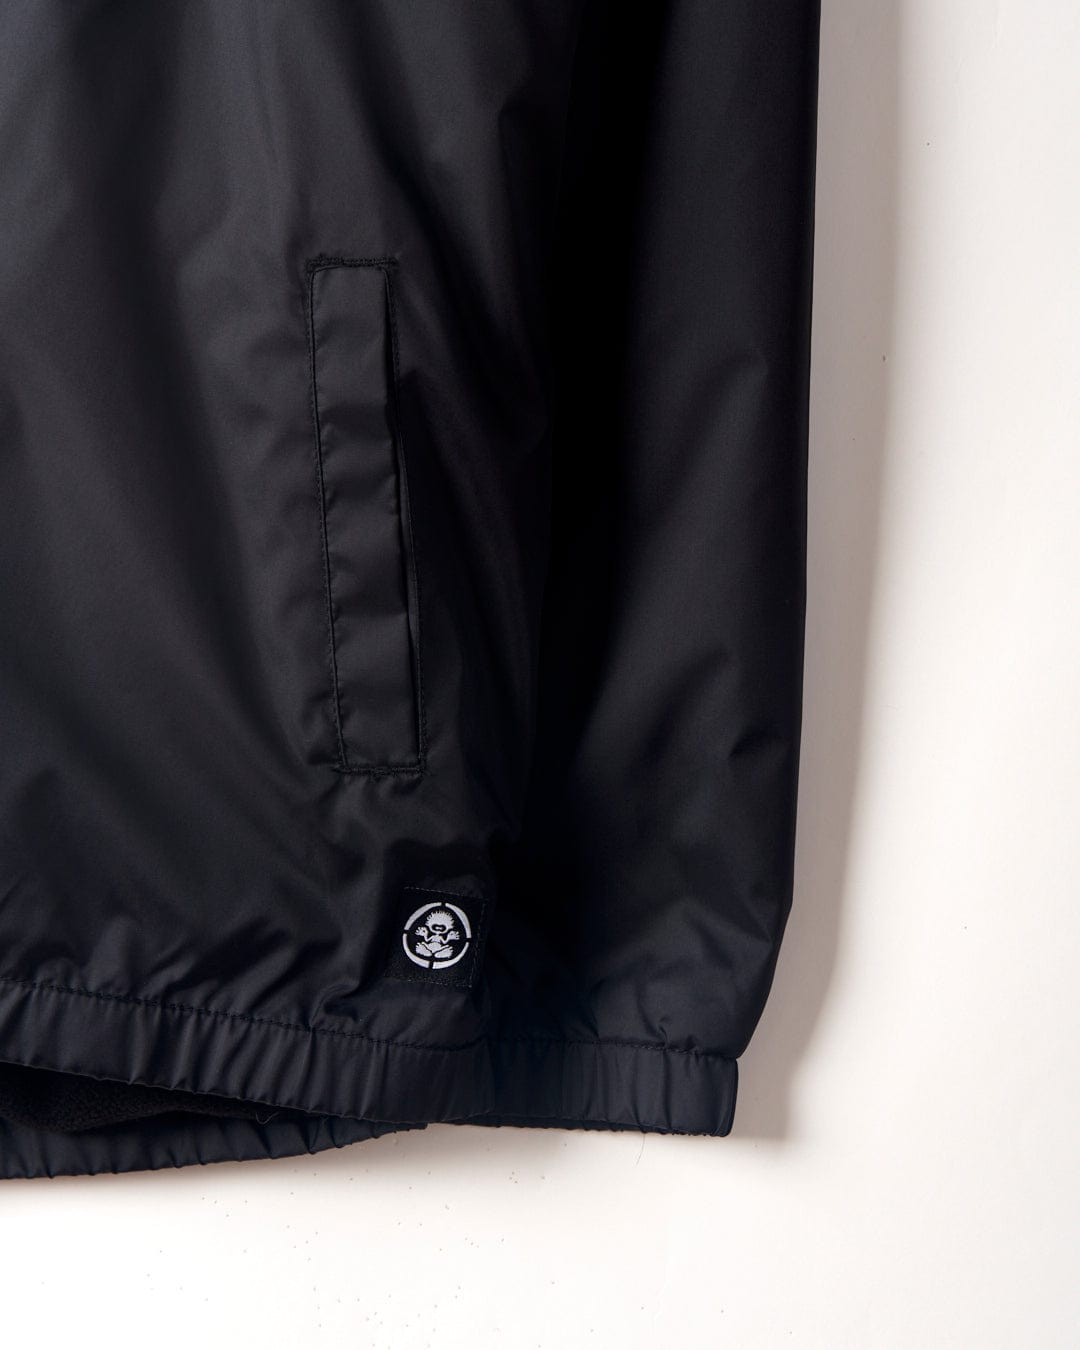 Close-up of a Saltrock Kingpin Krew - Kids Coach Jacket - Black hem with an embroidered logo patch on the lower right side and a vertical stitched pocket detail on textured fabric.